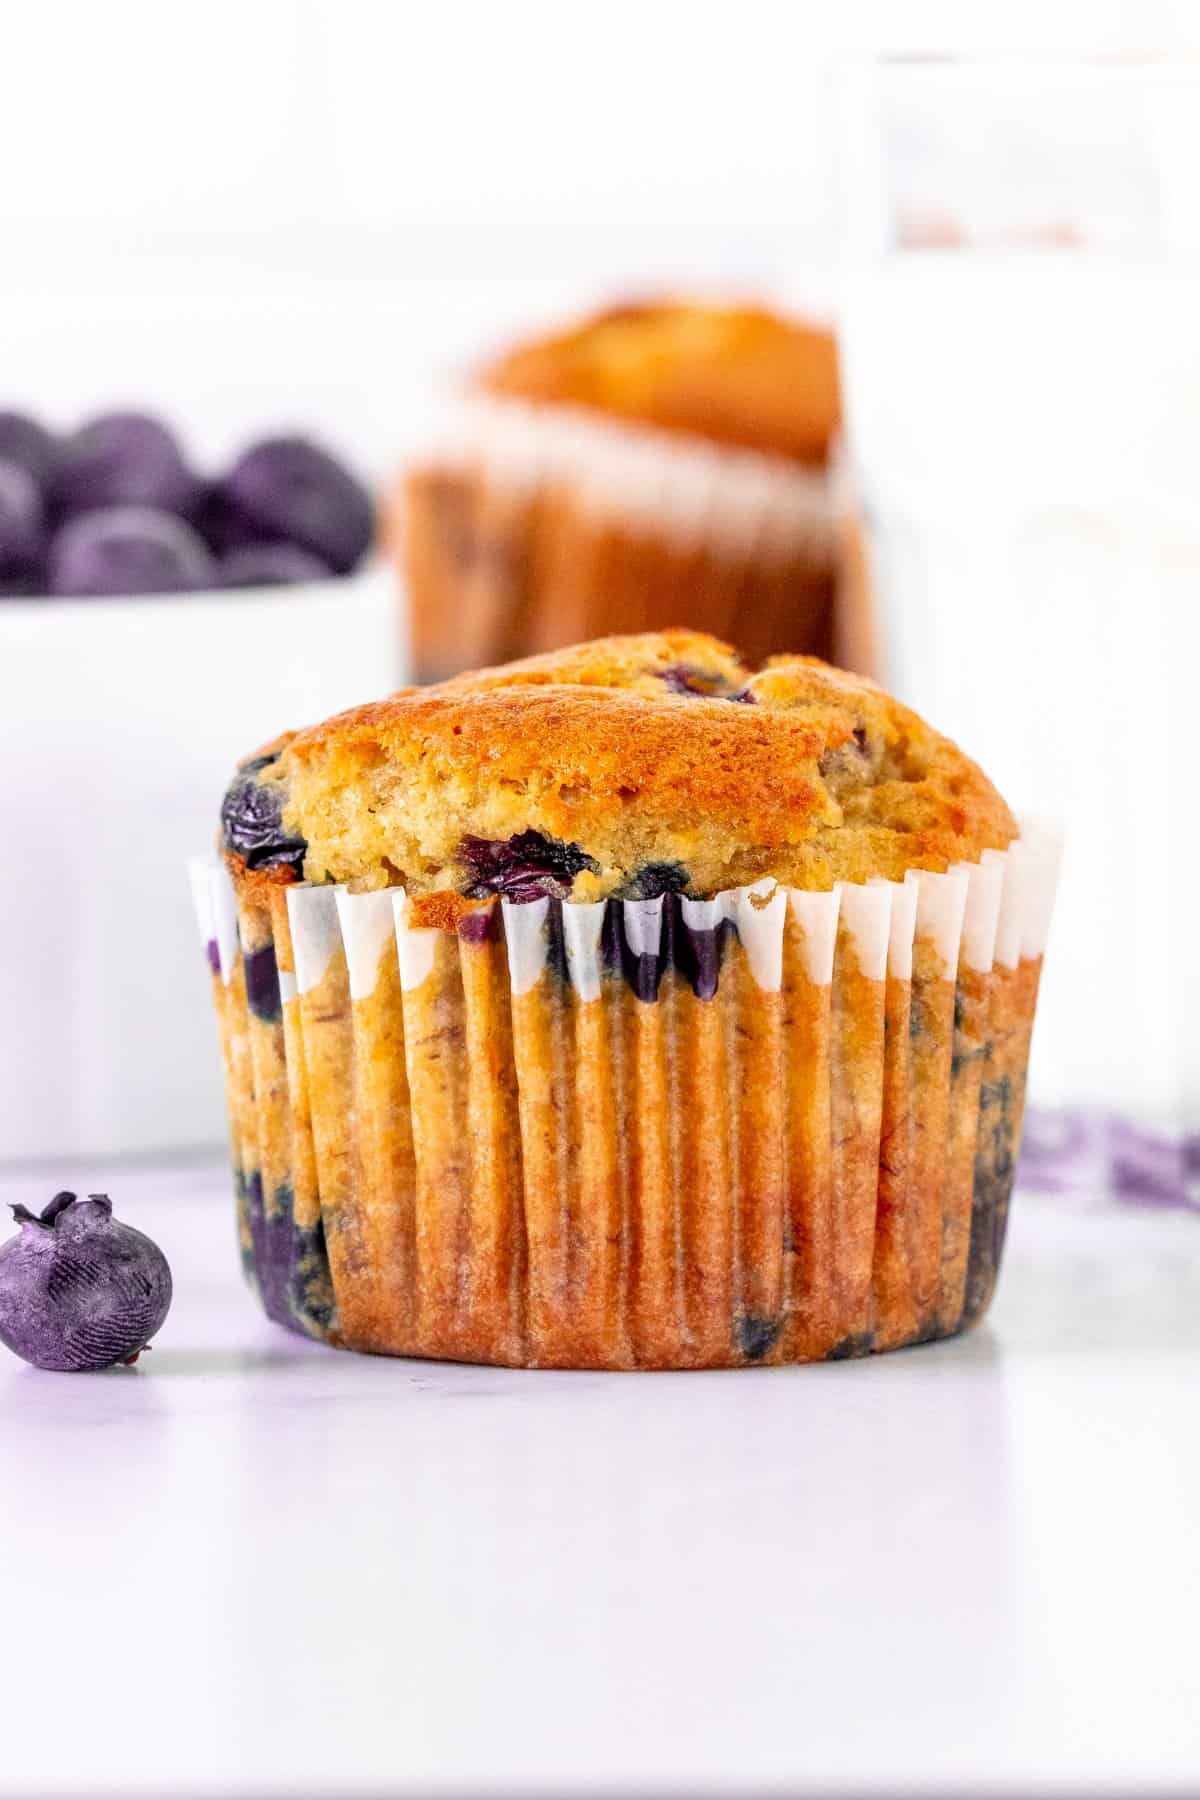 Blueberry banana muffin with glass of milk.